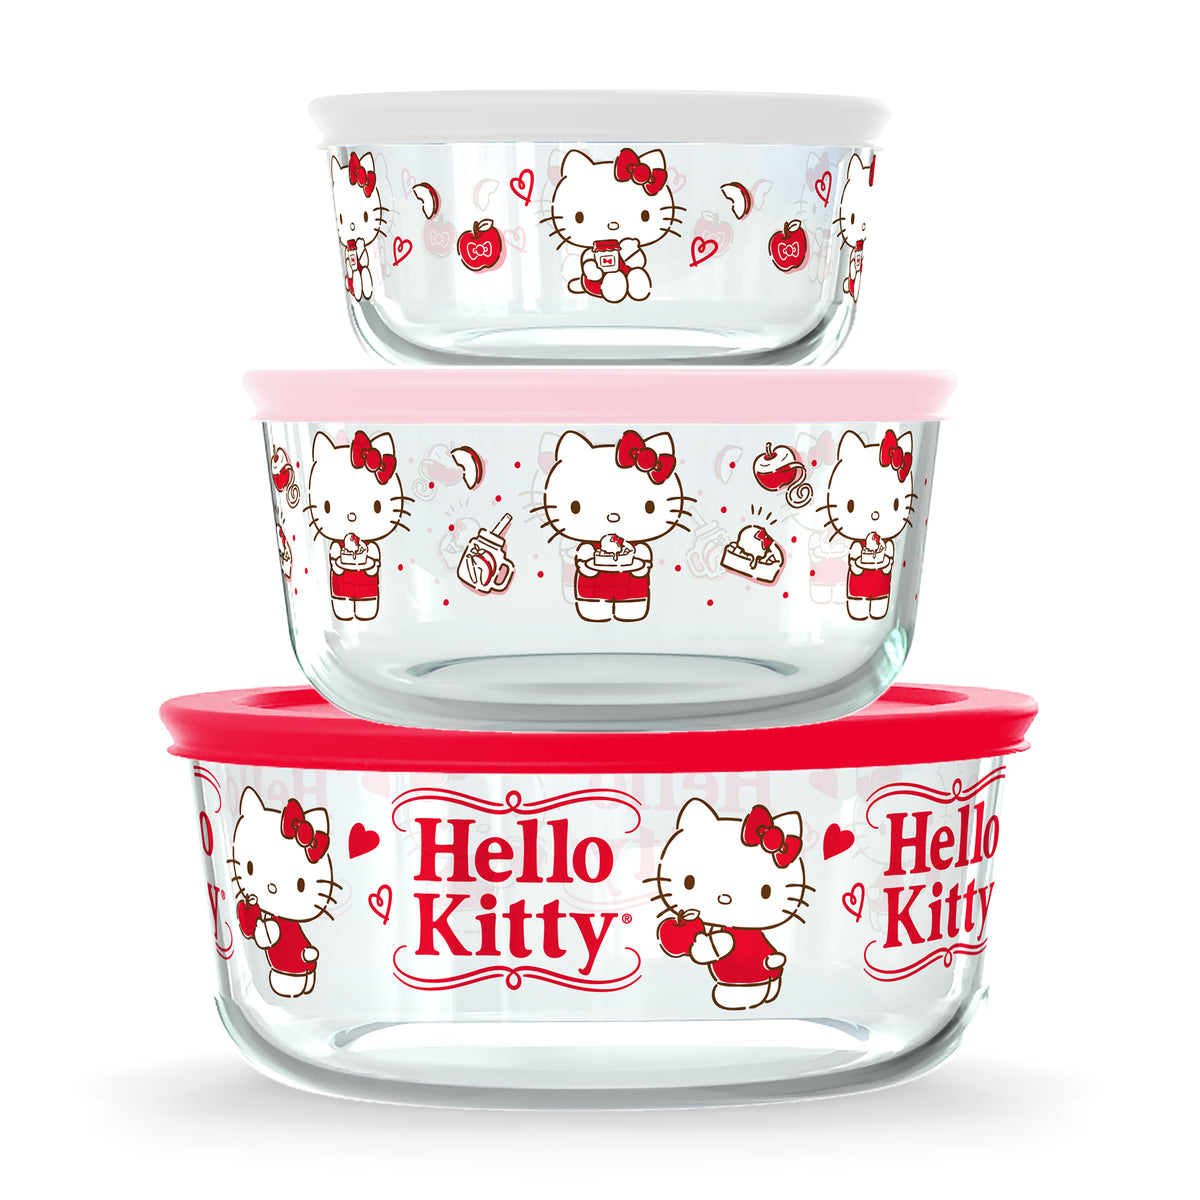 Pyrex Hello Kitty Round Glass Storage Container with Pink Lid - 1 Each